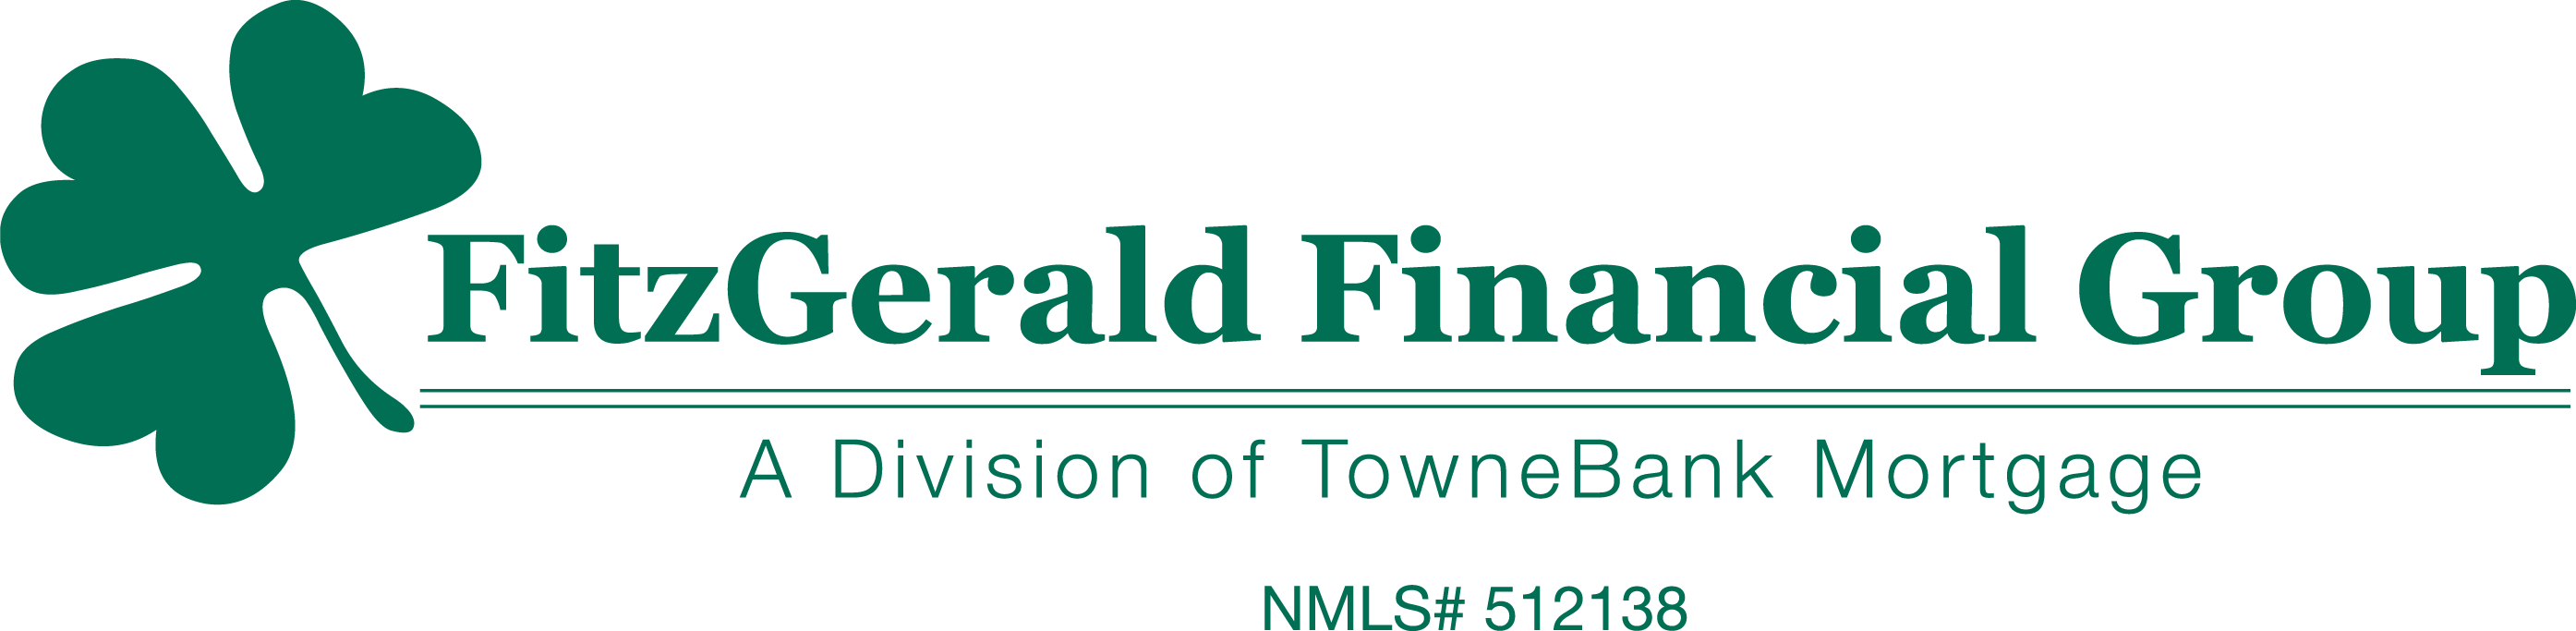 FitzGerald Financial Group a Division of TowneBank Mortgage logo